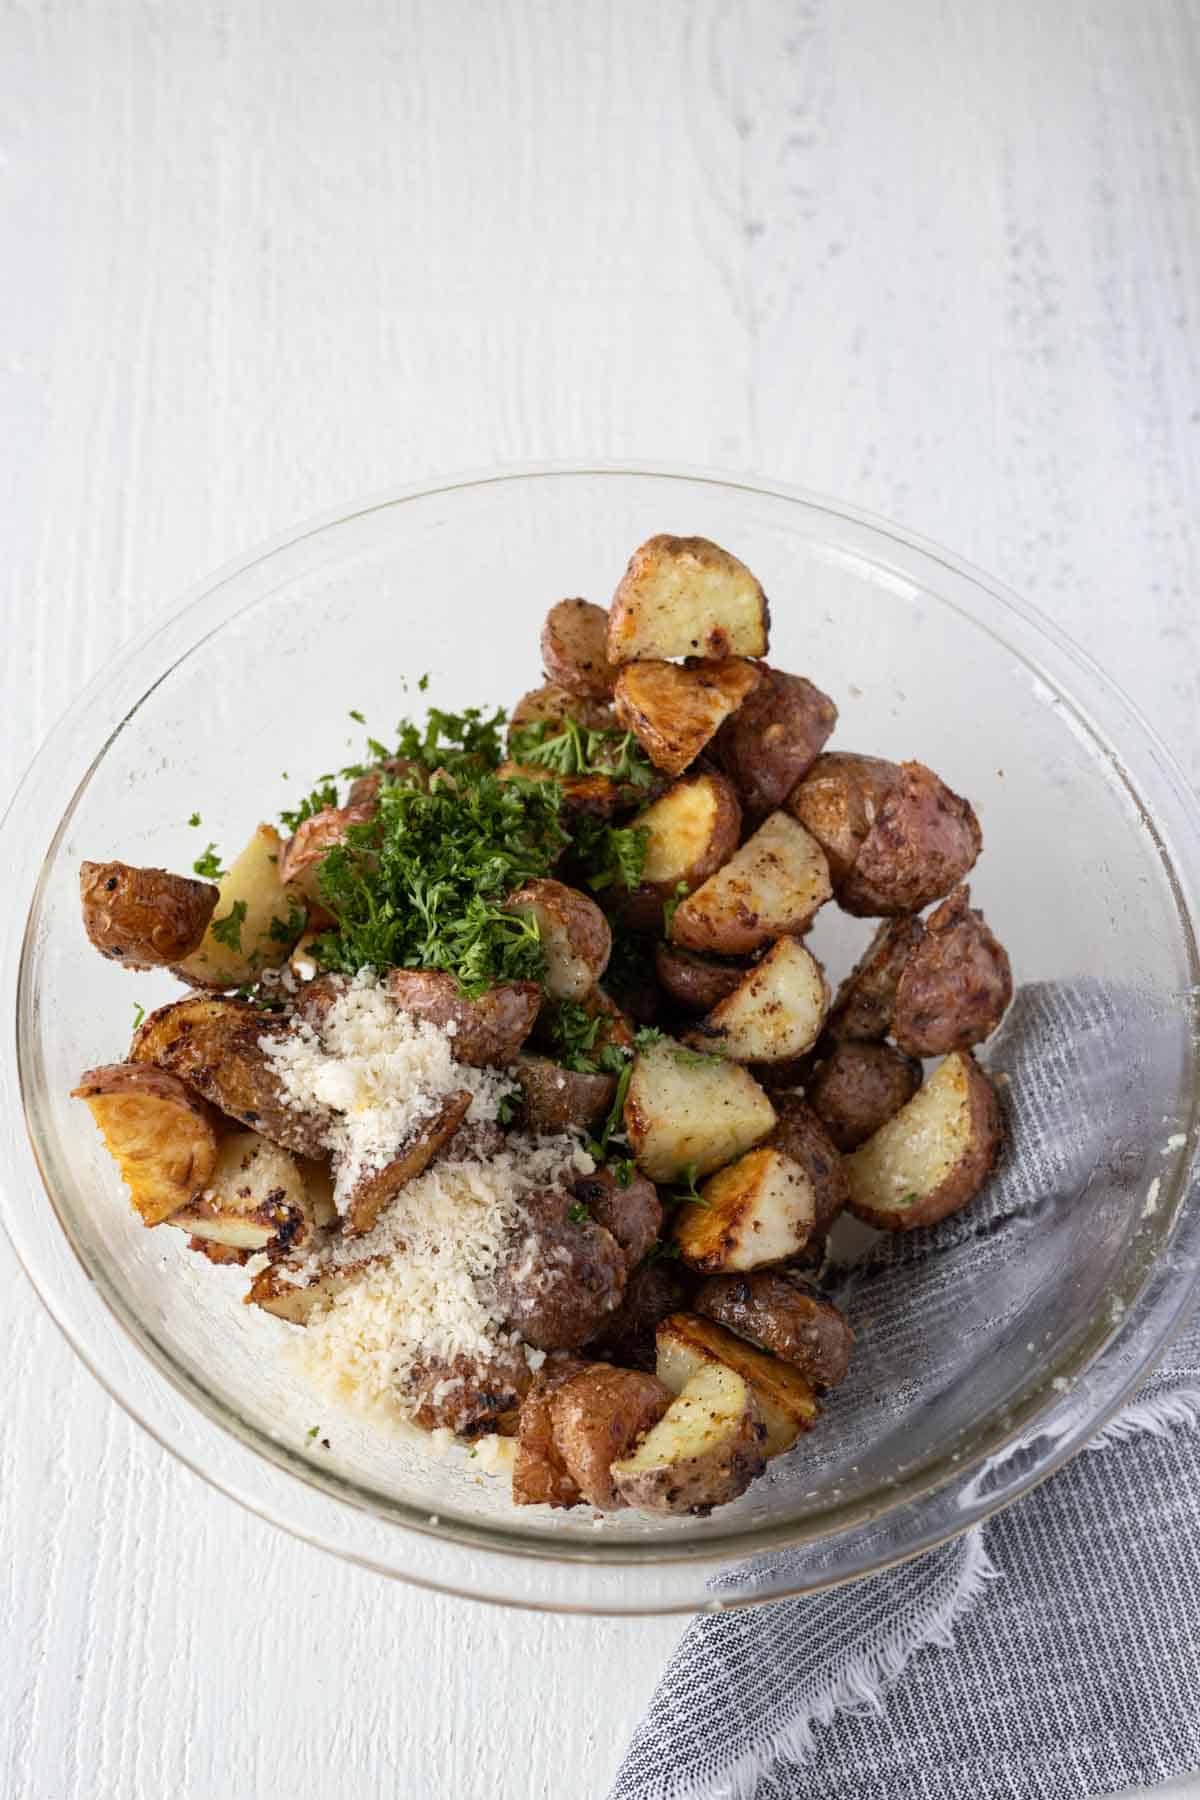 Golden brown roasted red potato pieces with parmesan cheese and minced parsely.